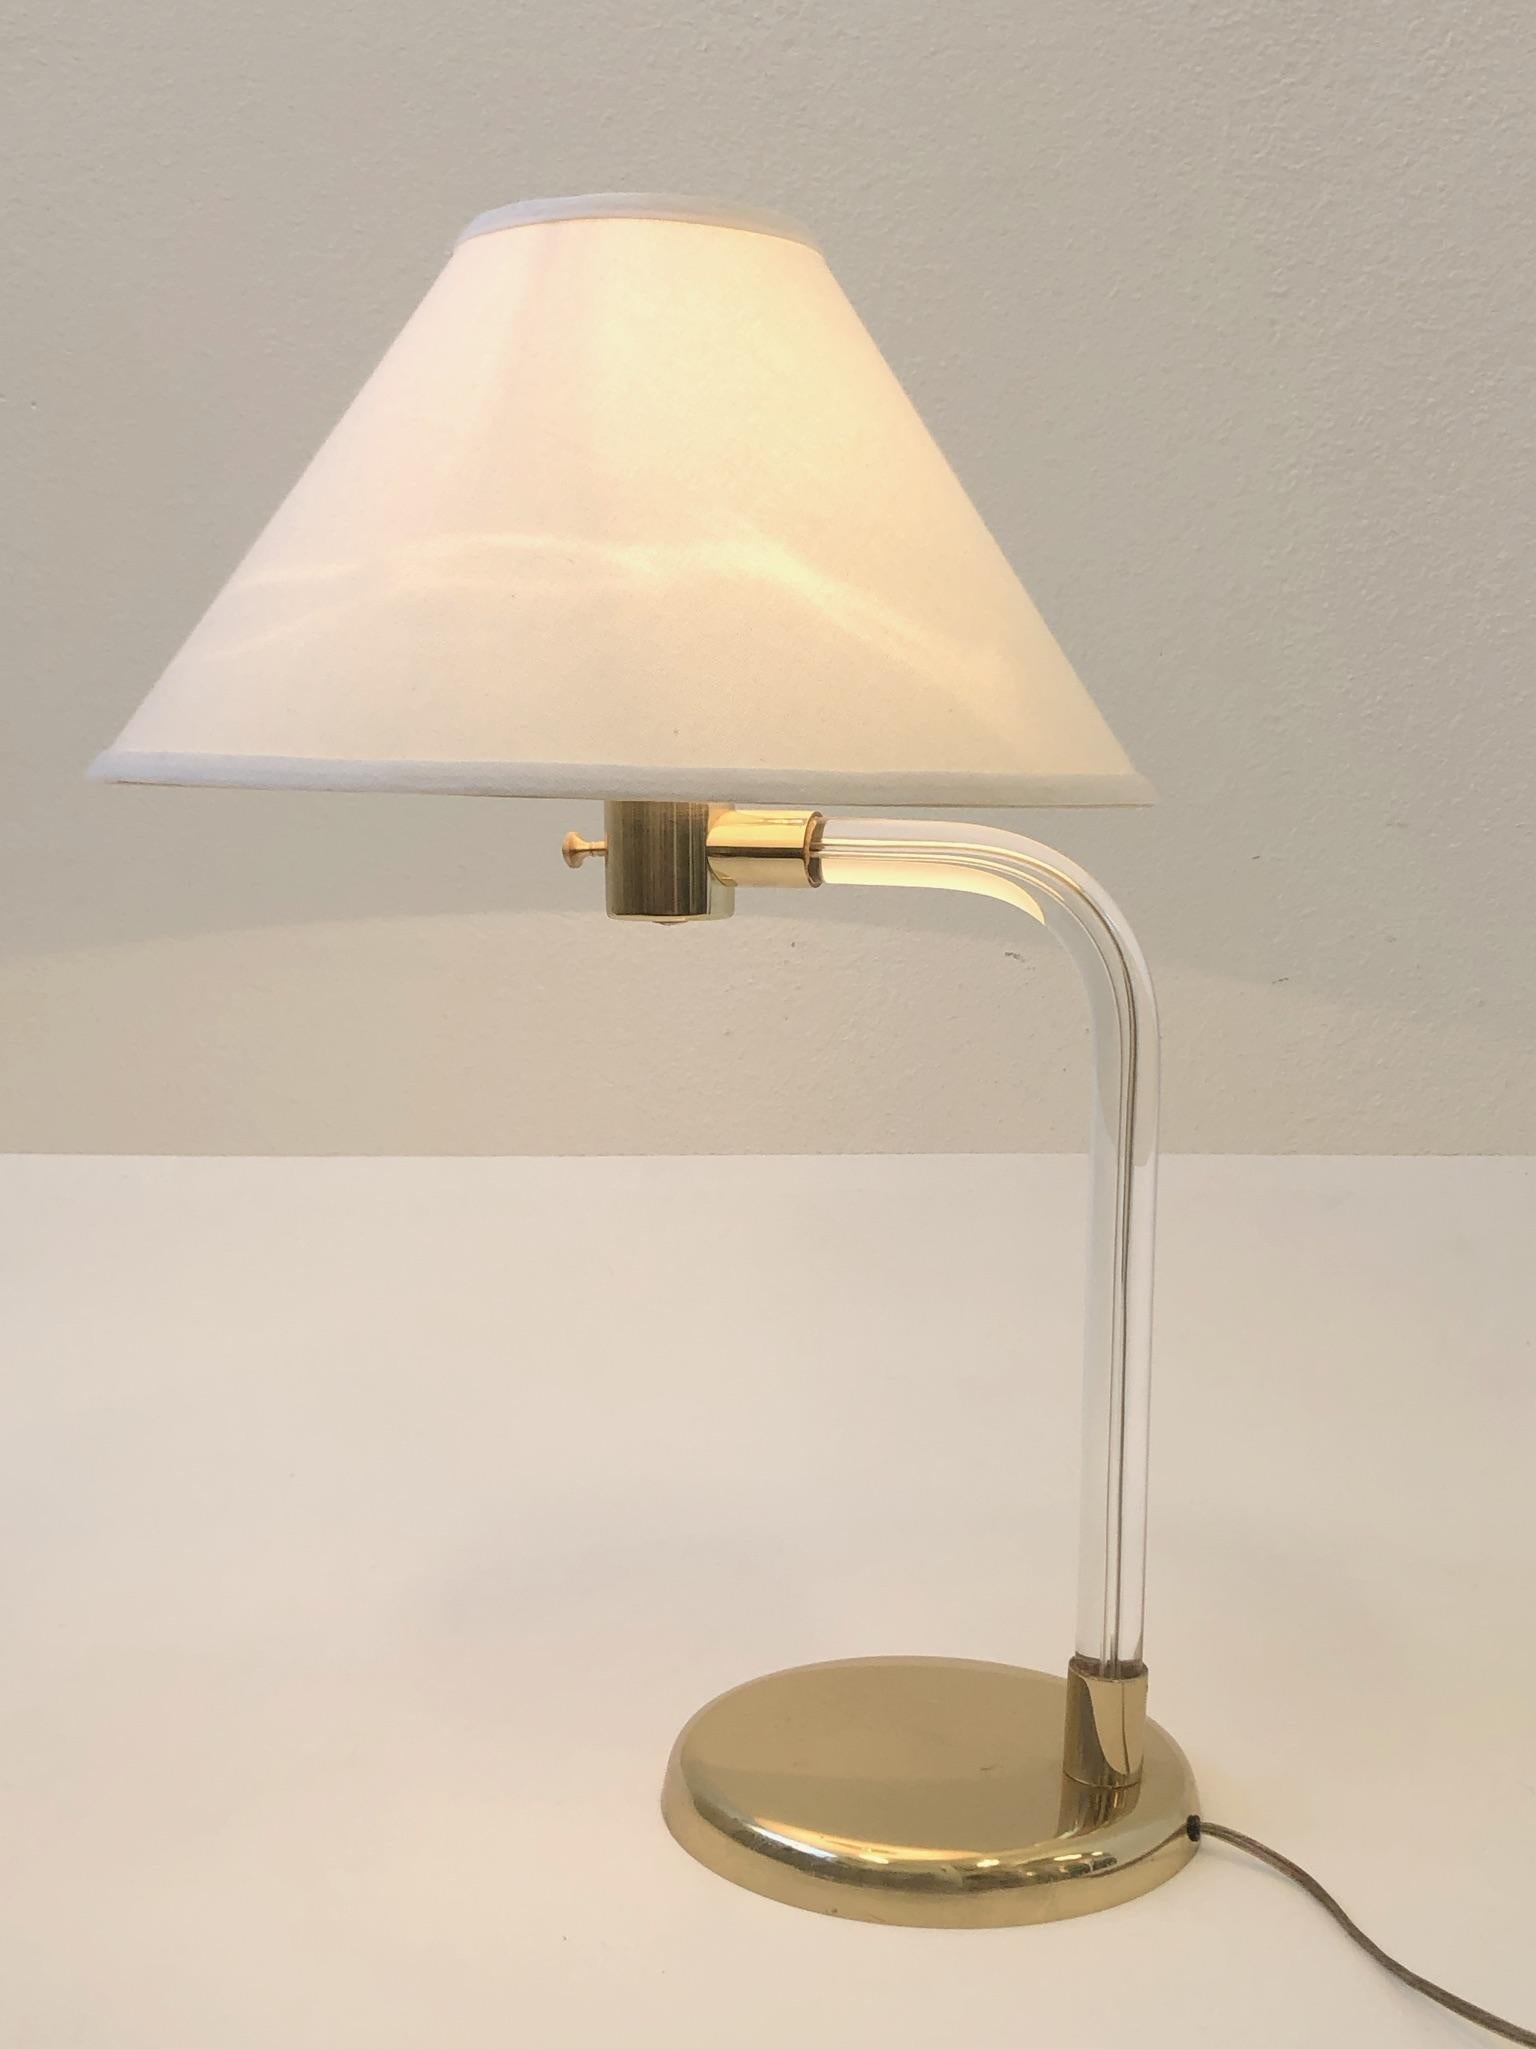 A glamorous polished brass and clear acrylic table lamp. The lamp is part of the Crylicord Lighting collection design by Peter Hamburger for Knoll International in the 1970s.
The lamp has been newly rewired, shade is vanilla linen.
Overall